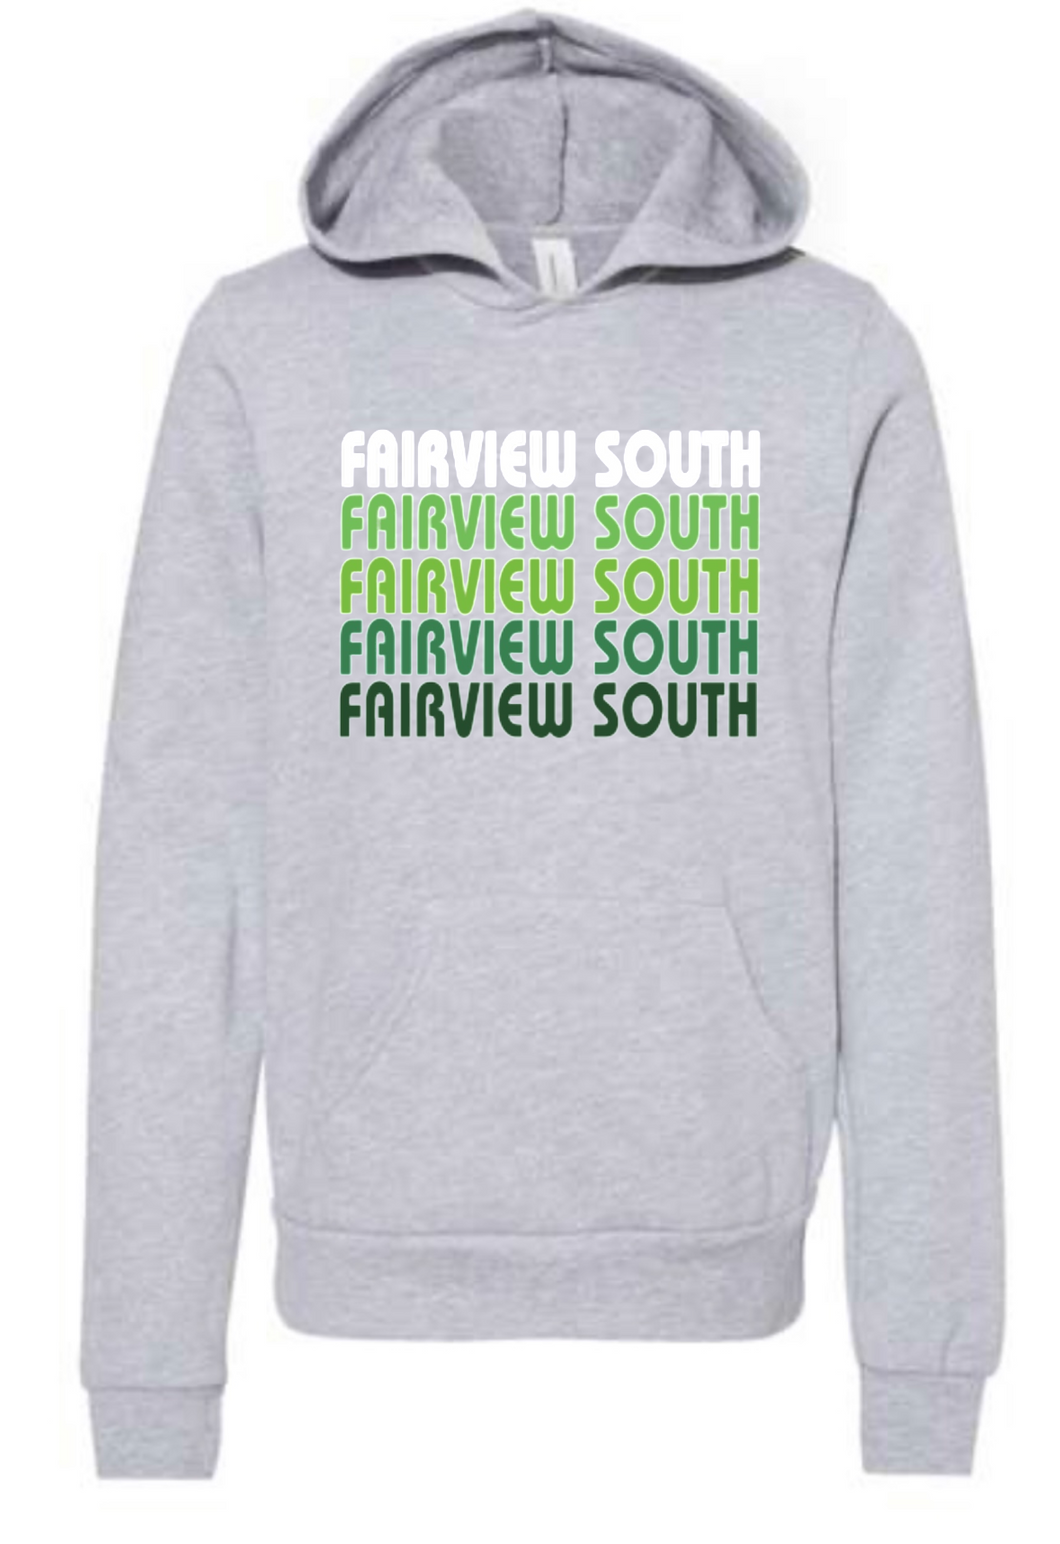 FAIRVIEW SOUTH Repeat Hoody